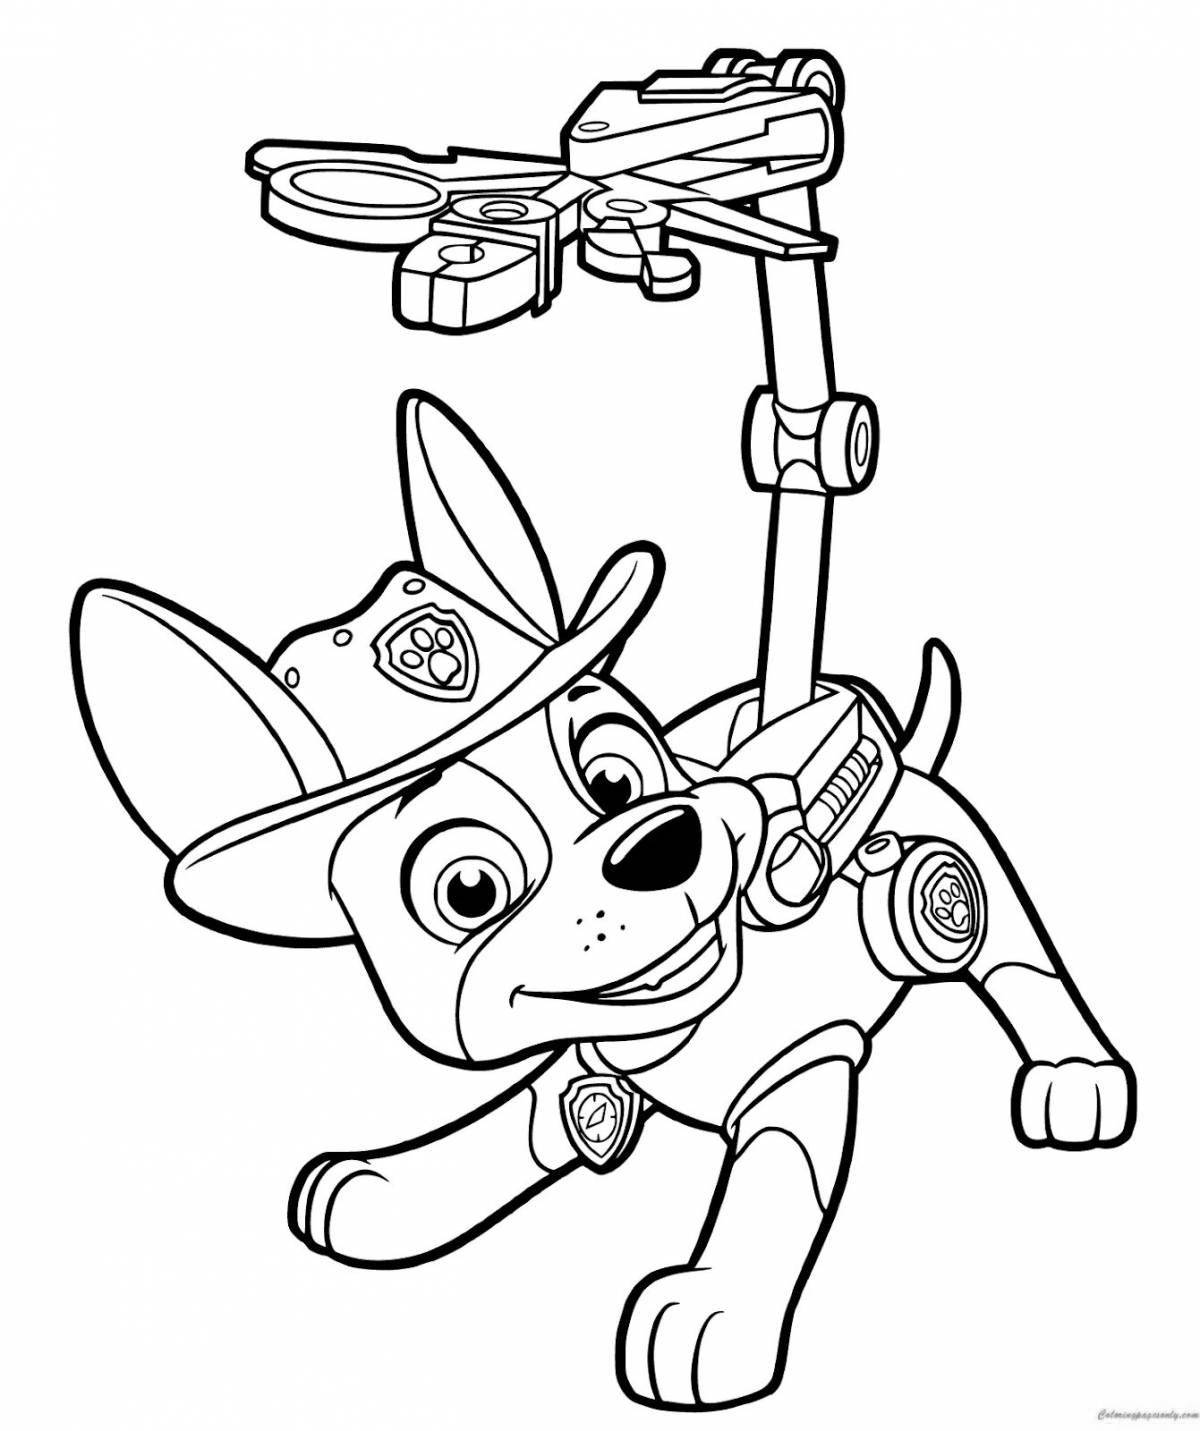 Coloring page graceful racer